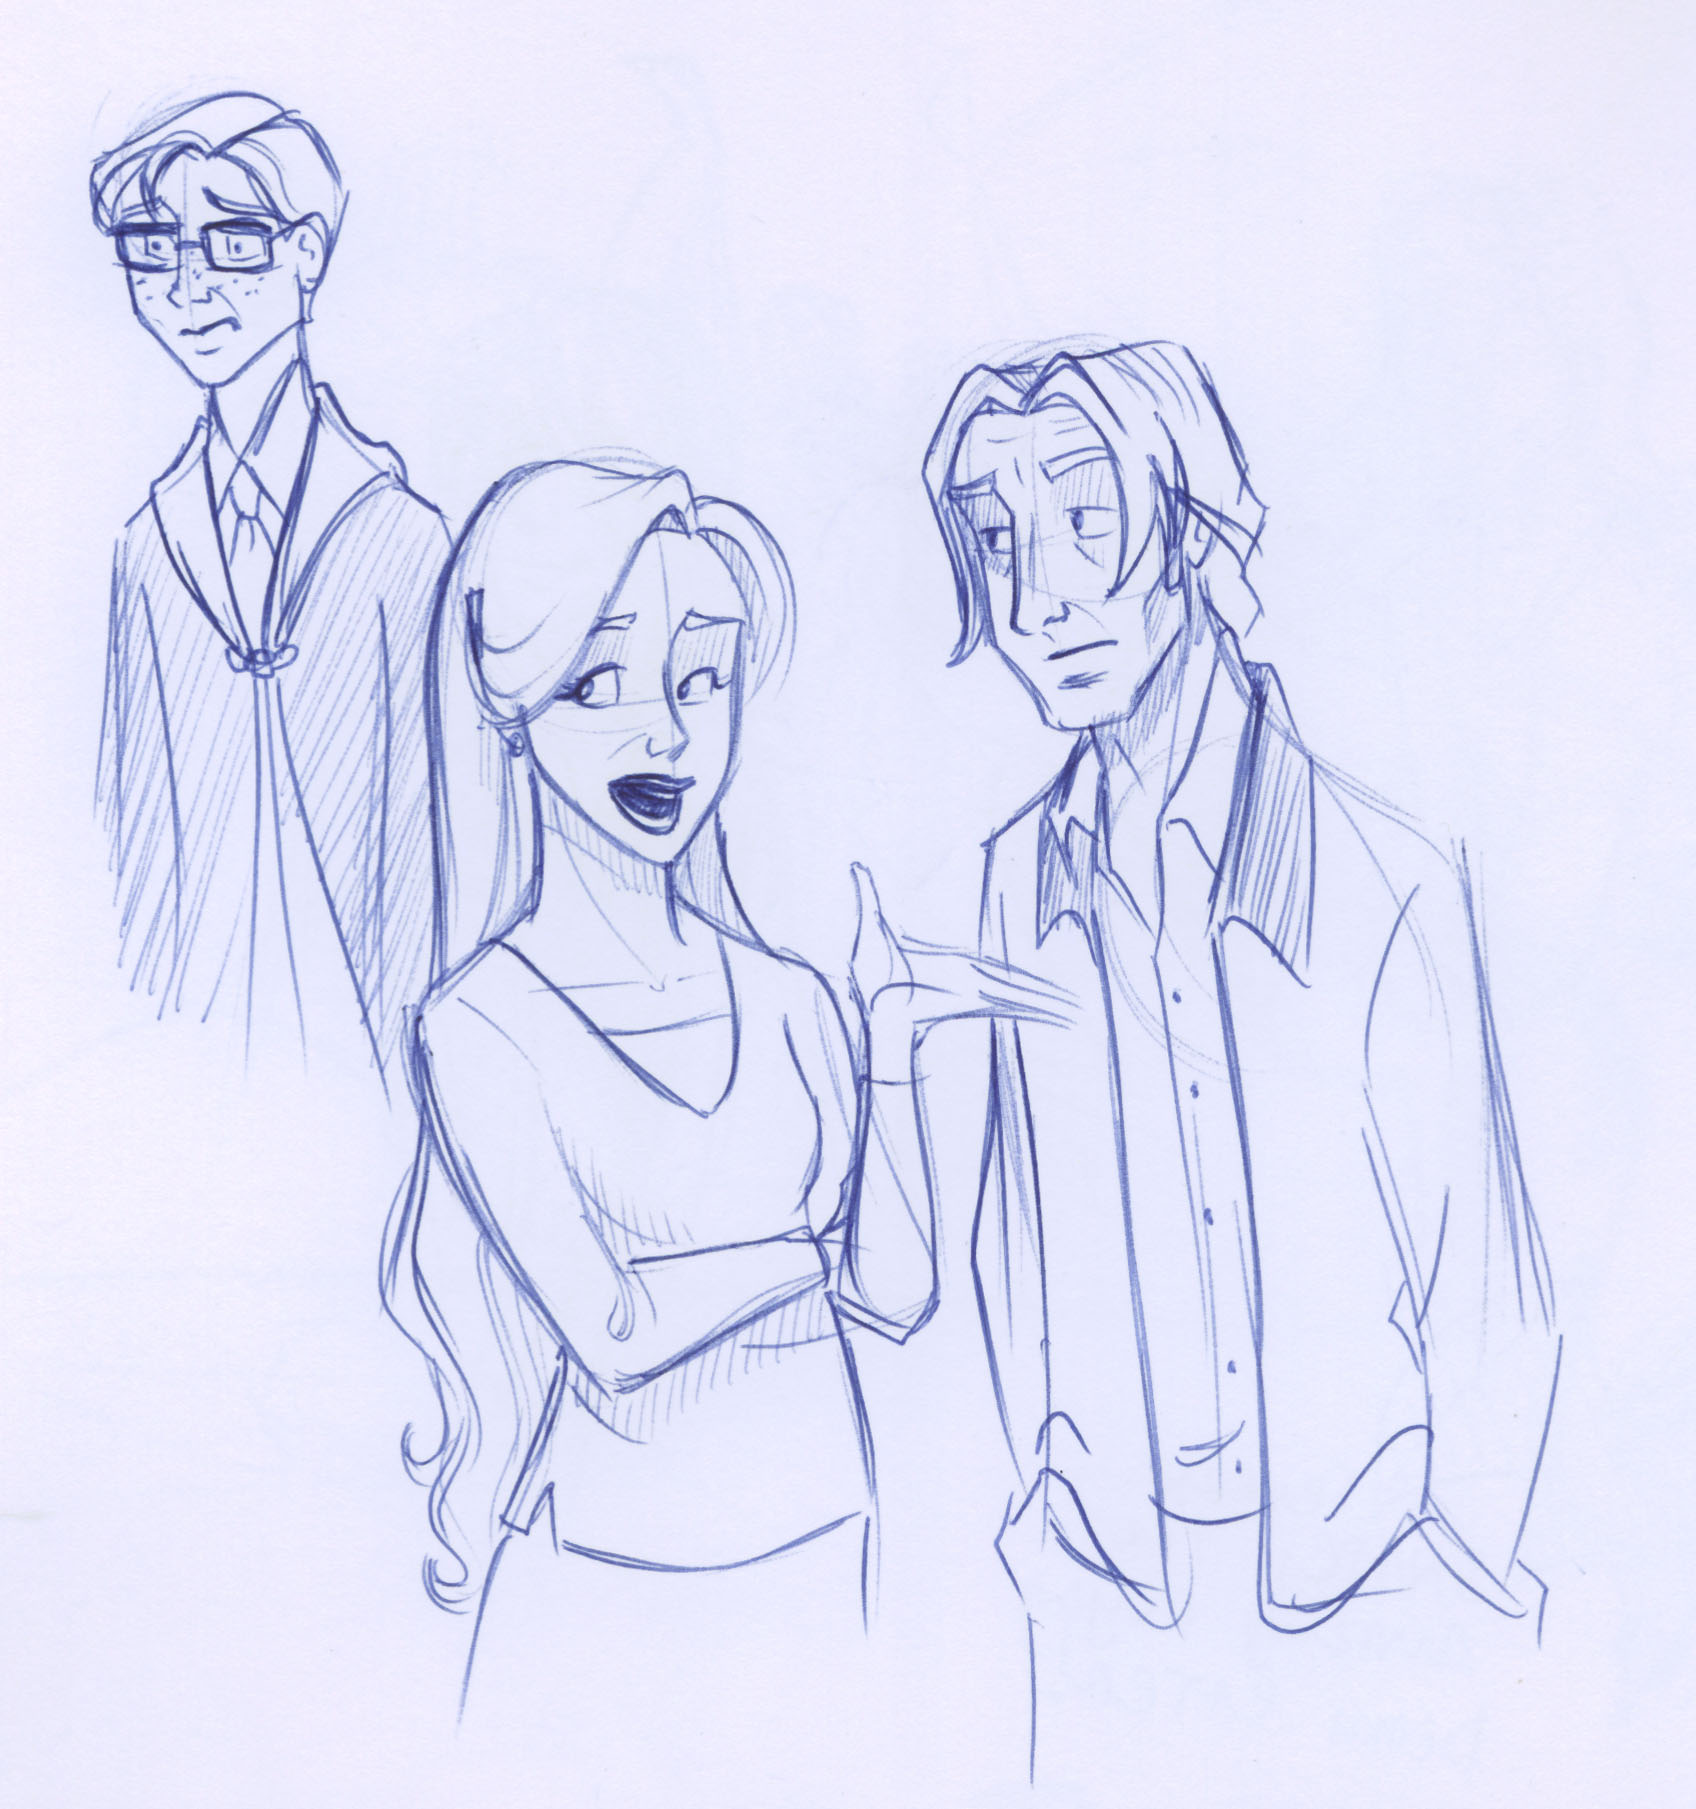 When Percy appears to fight the Death Eaters, Fleur breaks the unbearable tension by asking Lupin about Teddy.